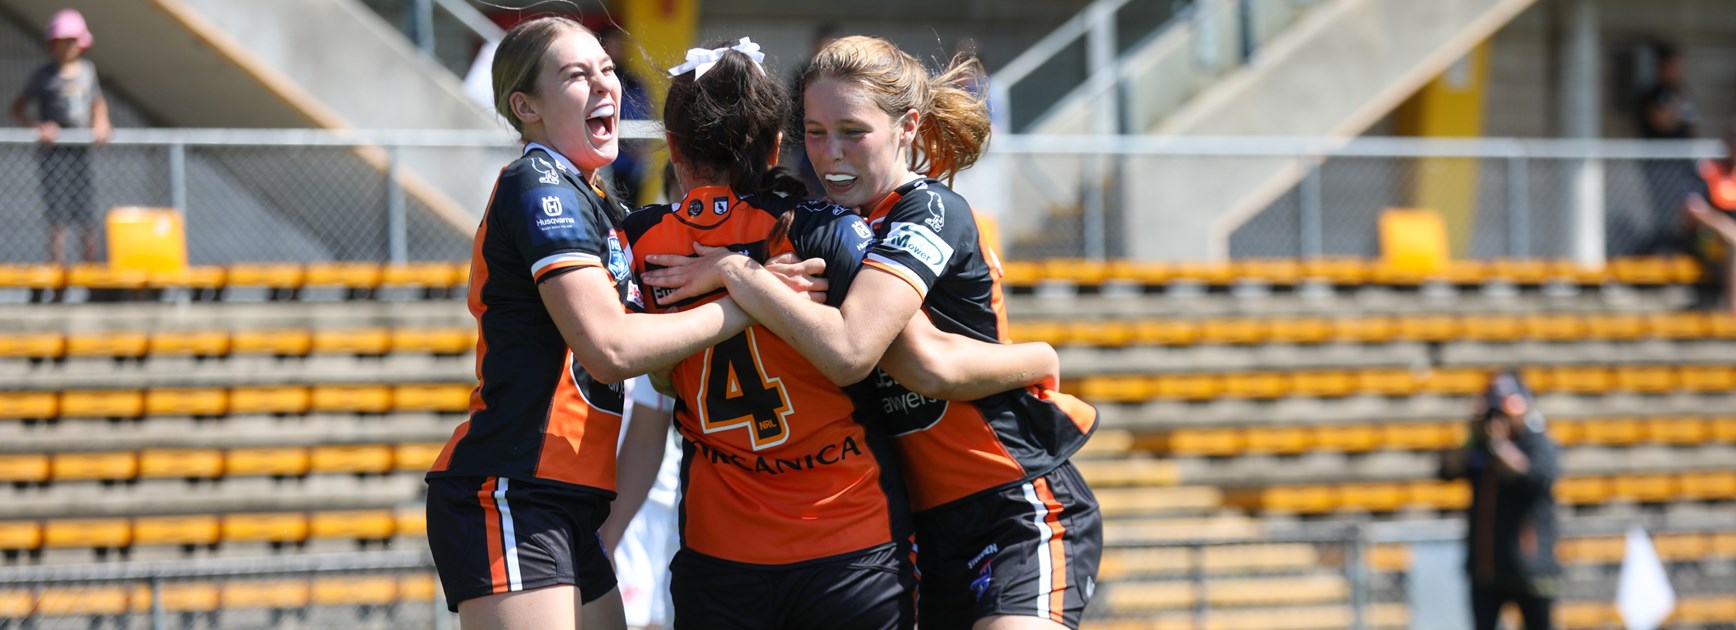 Pathways Report: Tarsha Gale Cup